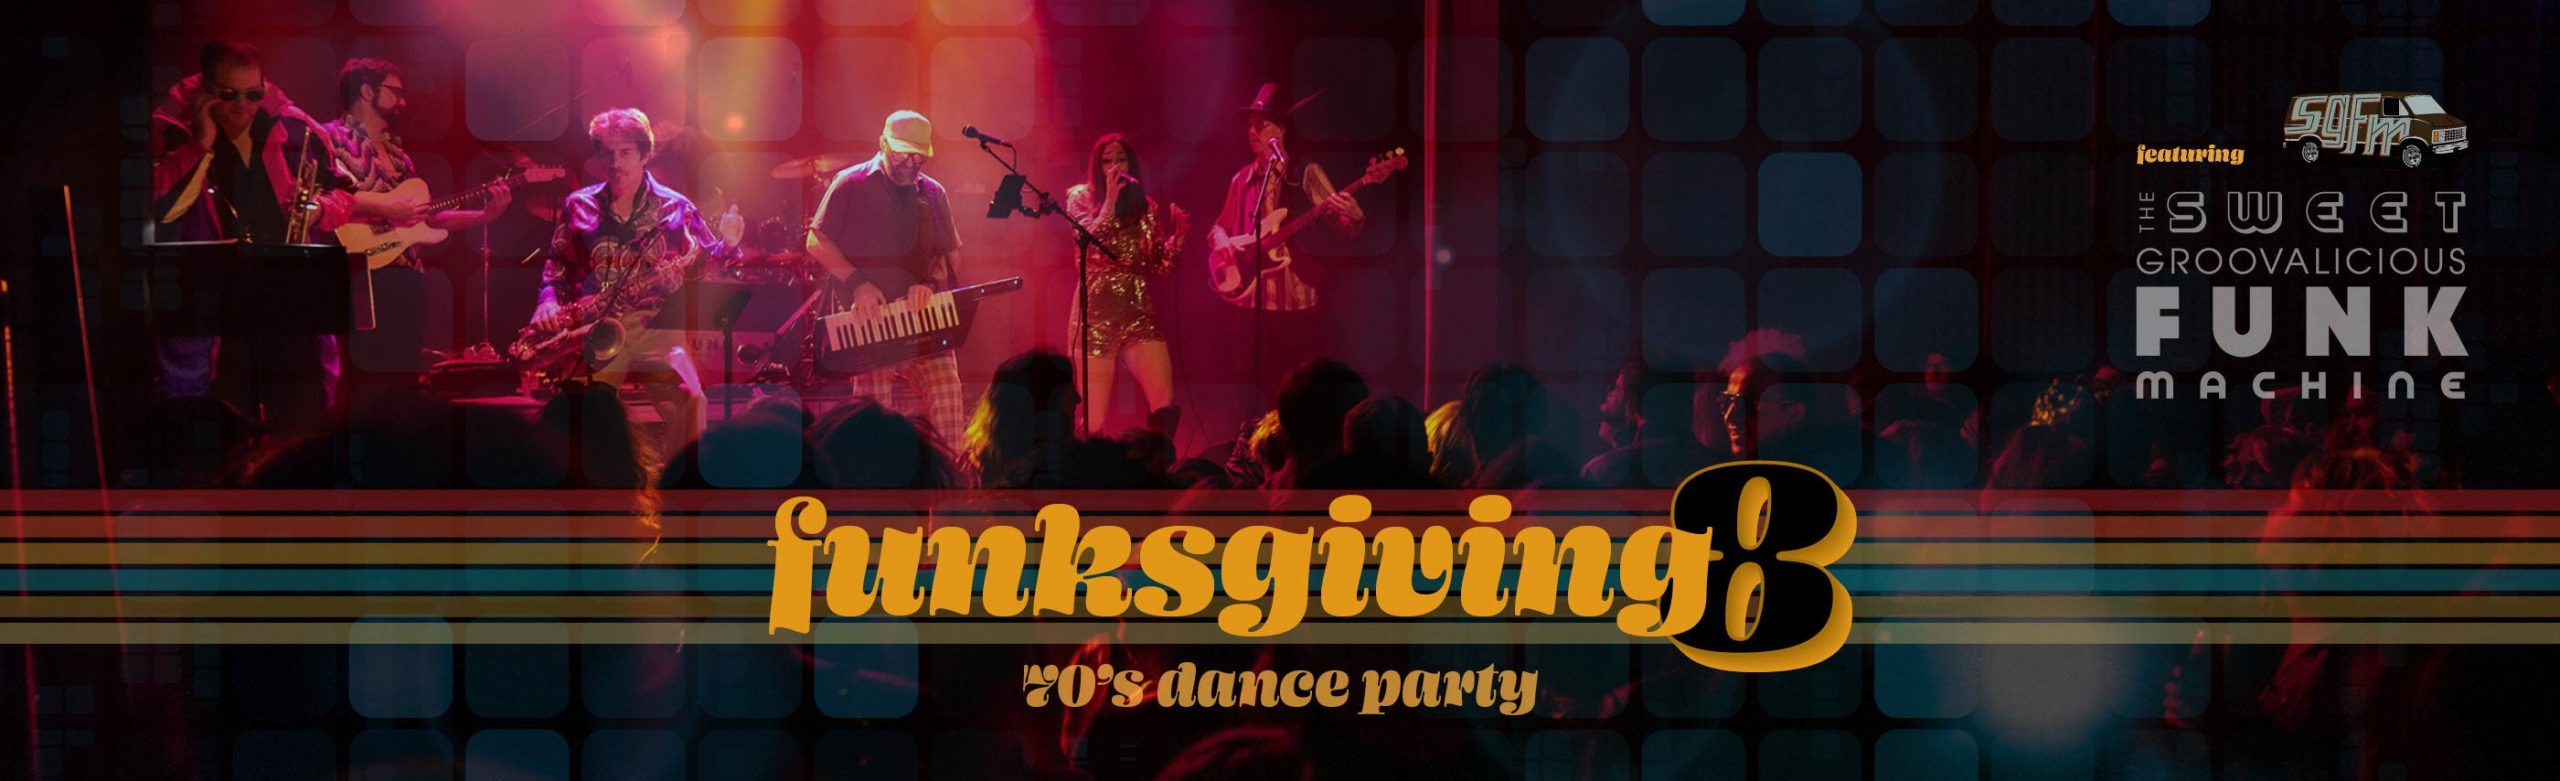 8th Annual FUNKSGIVING Confirmed at The ELM Image